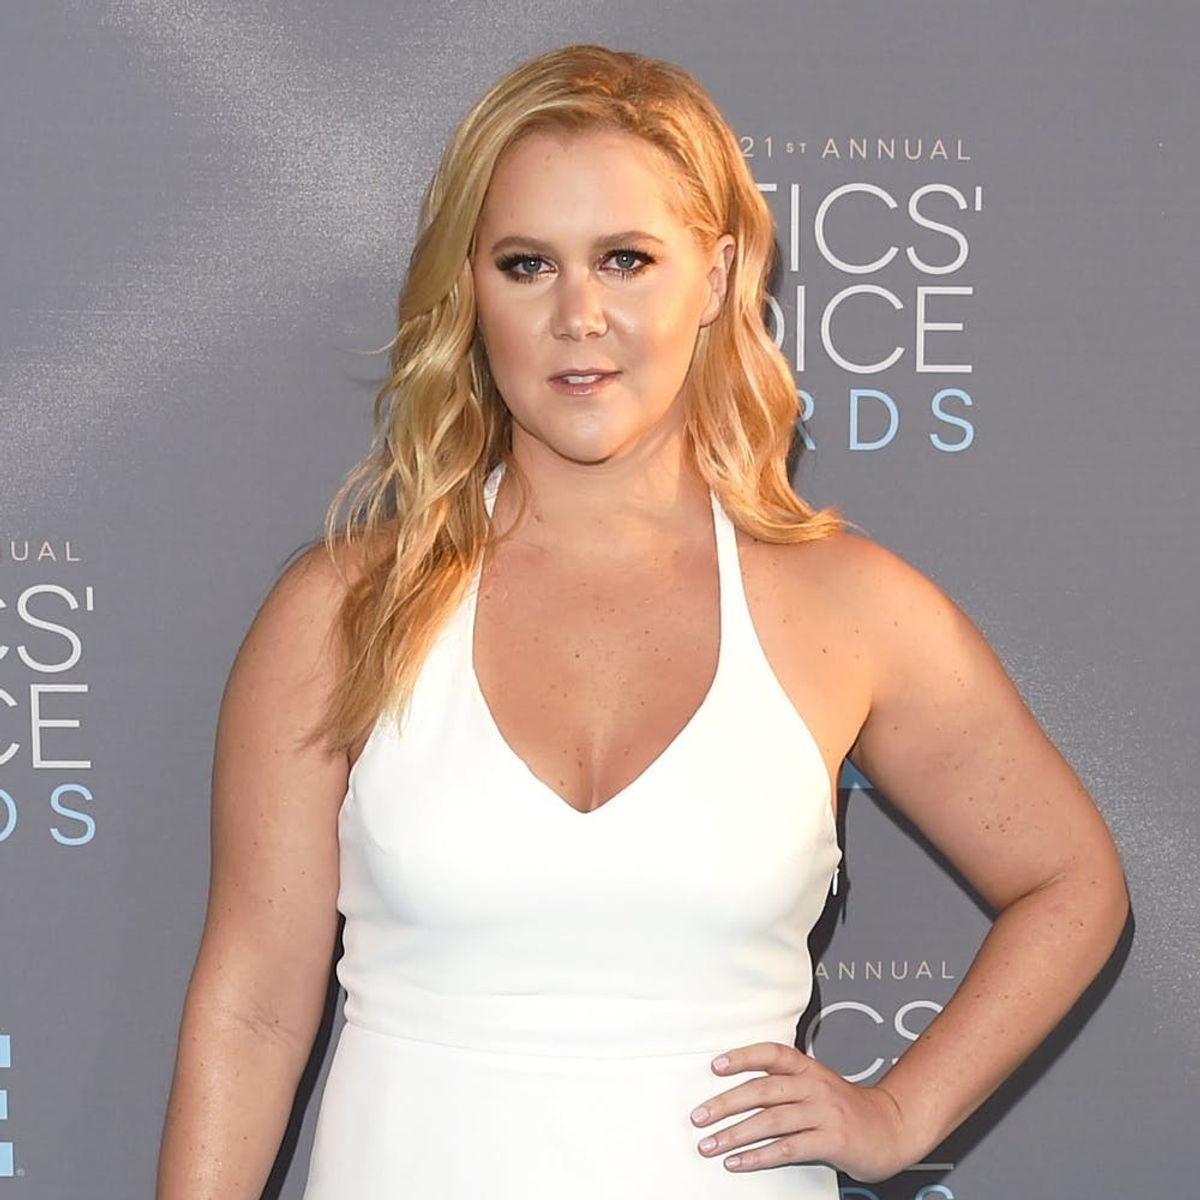 Amy Schumer Claps Back at Body Shamers With Bikini Snaps